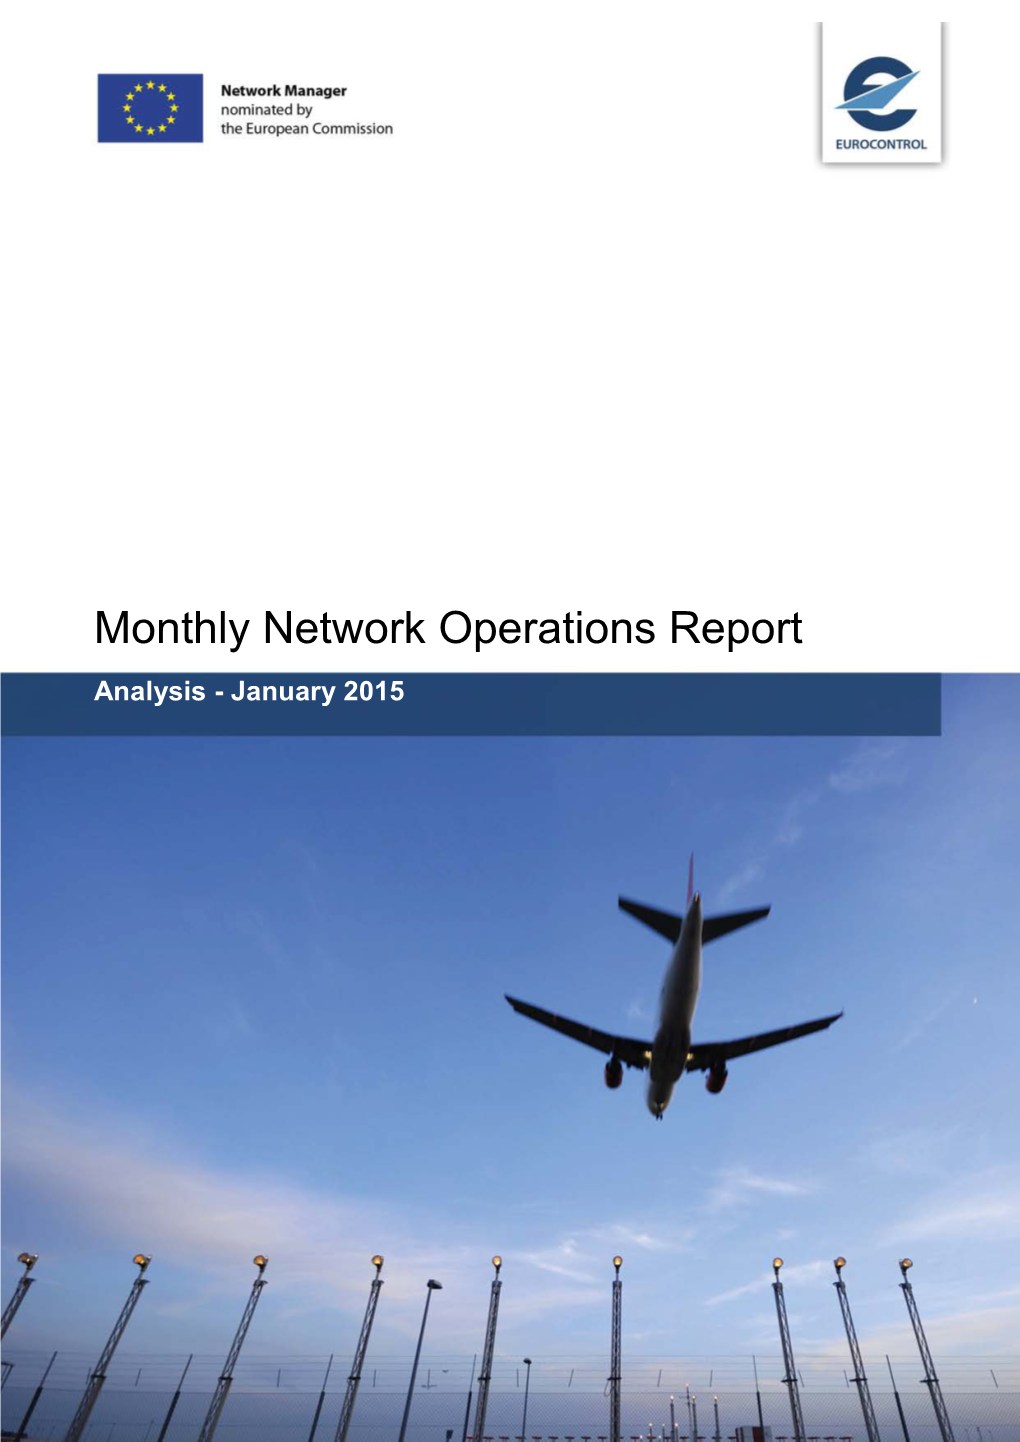 NM Monthly Network Operations Report - Analysis - January 2015 1